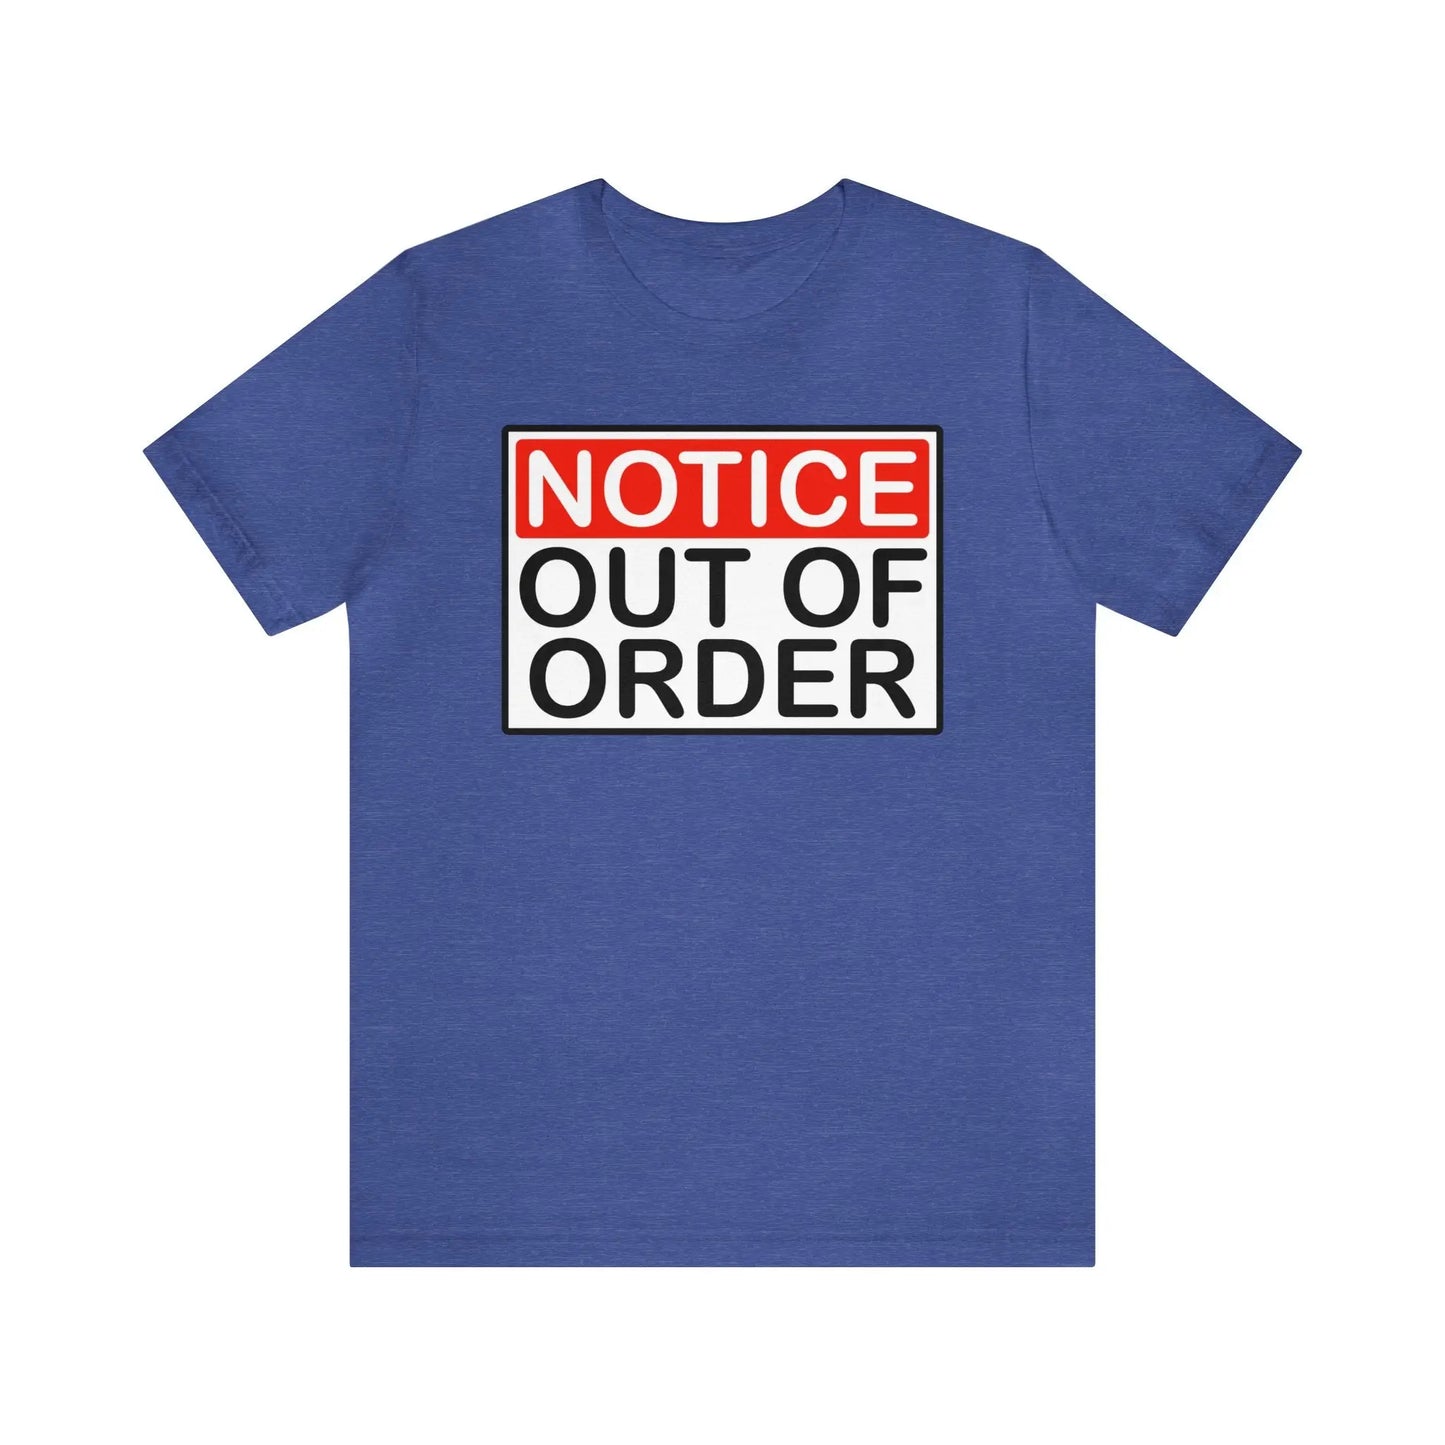 Notice Out Of Order Men's Short Sleeve Tee - Wicked Tees